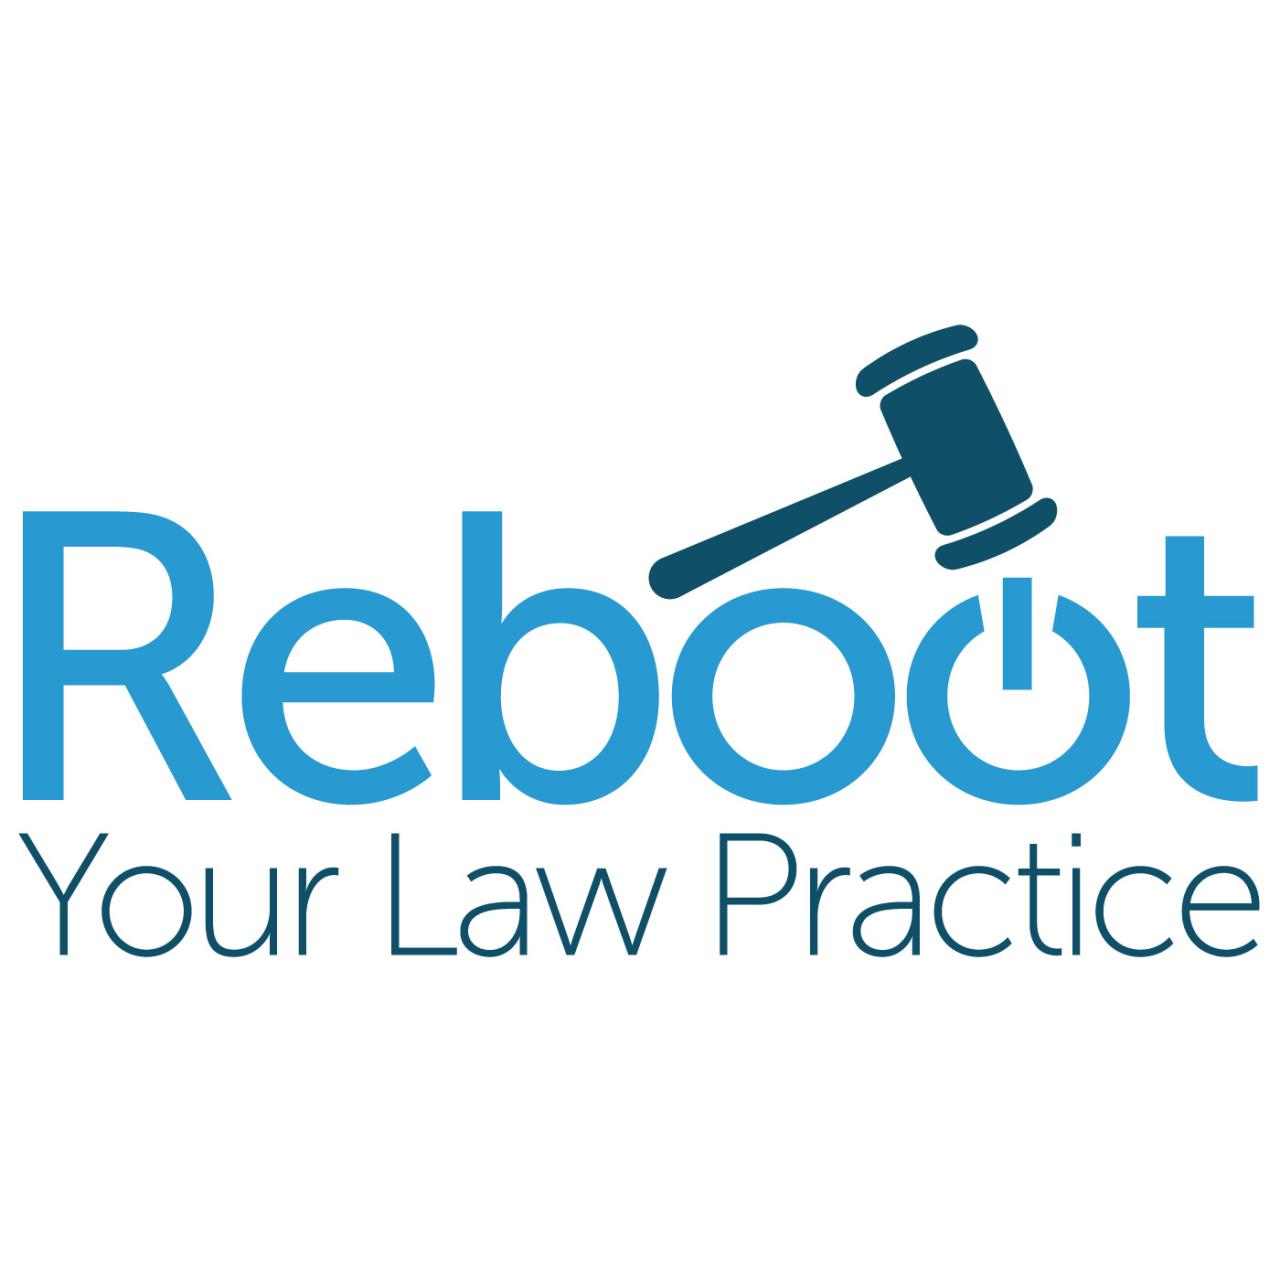 Reboot your law practice podcast 4 how providing value is a key to business development